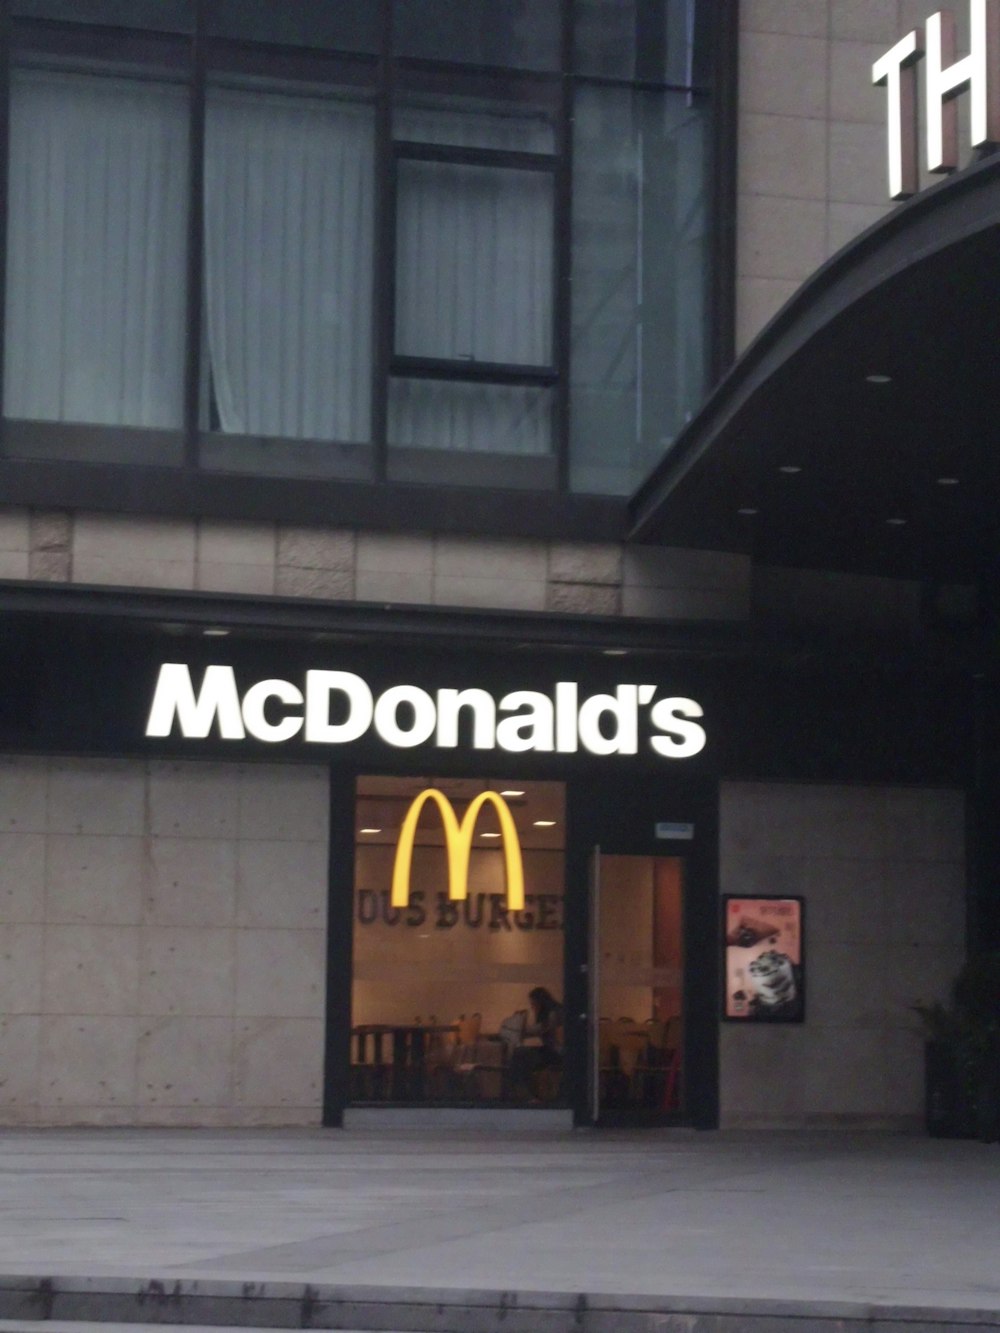 a mcdonald's restaurant is shown in front of a building